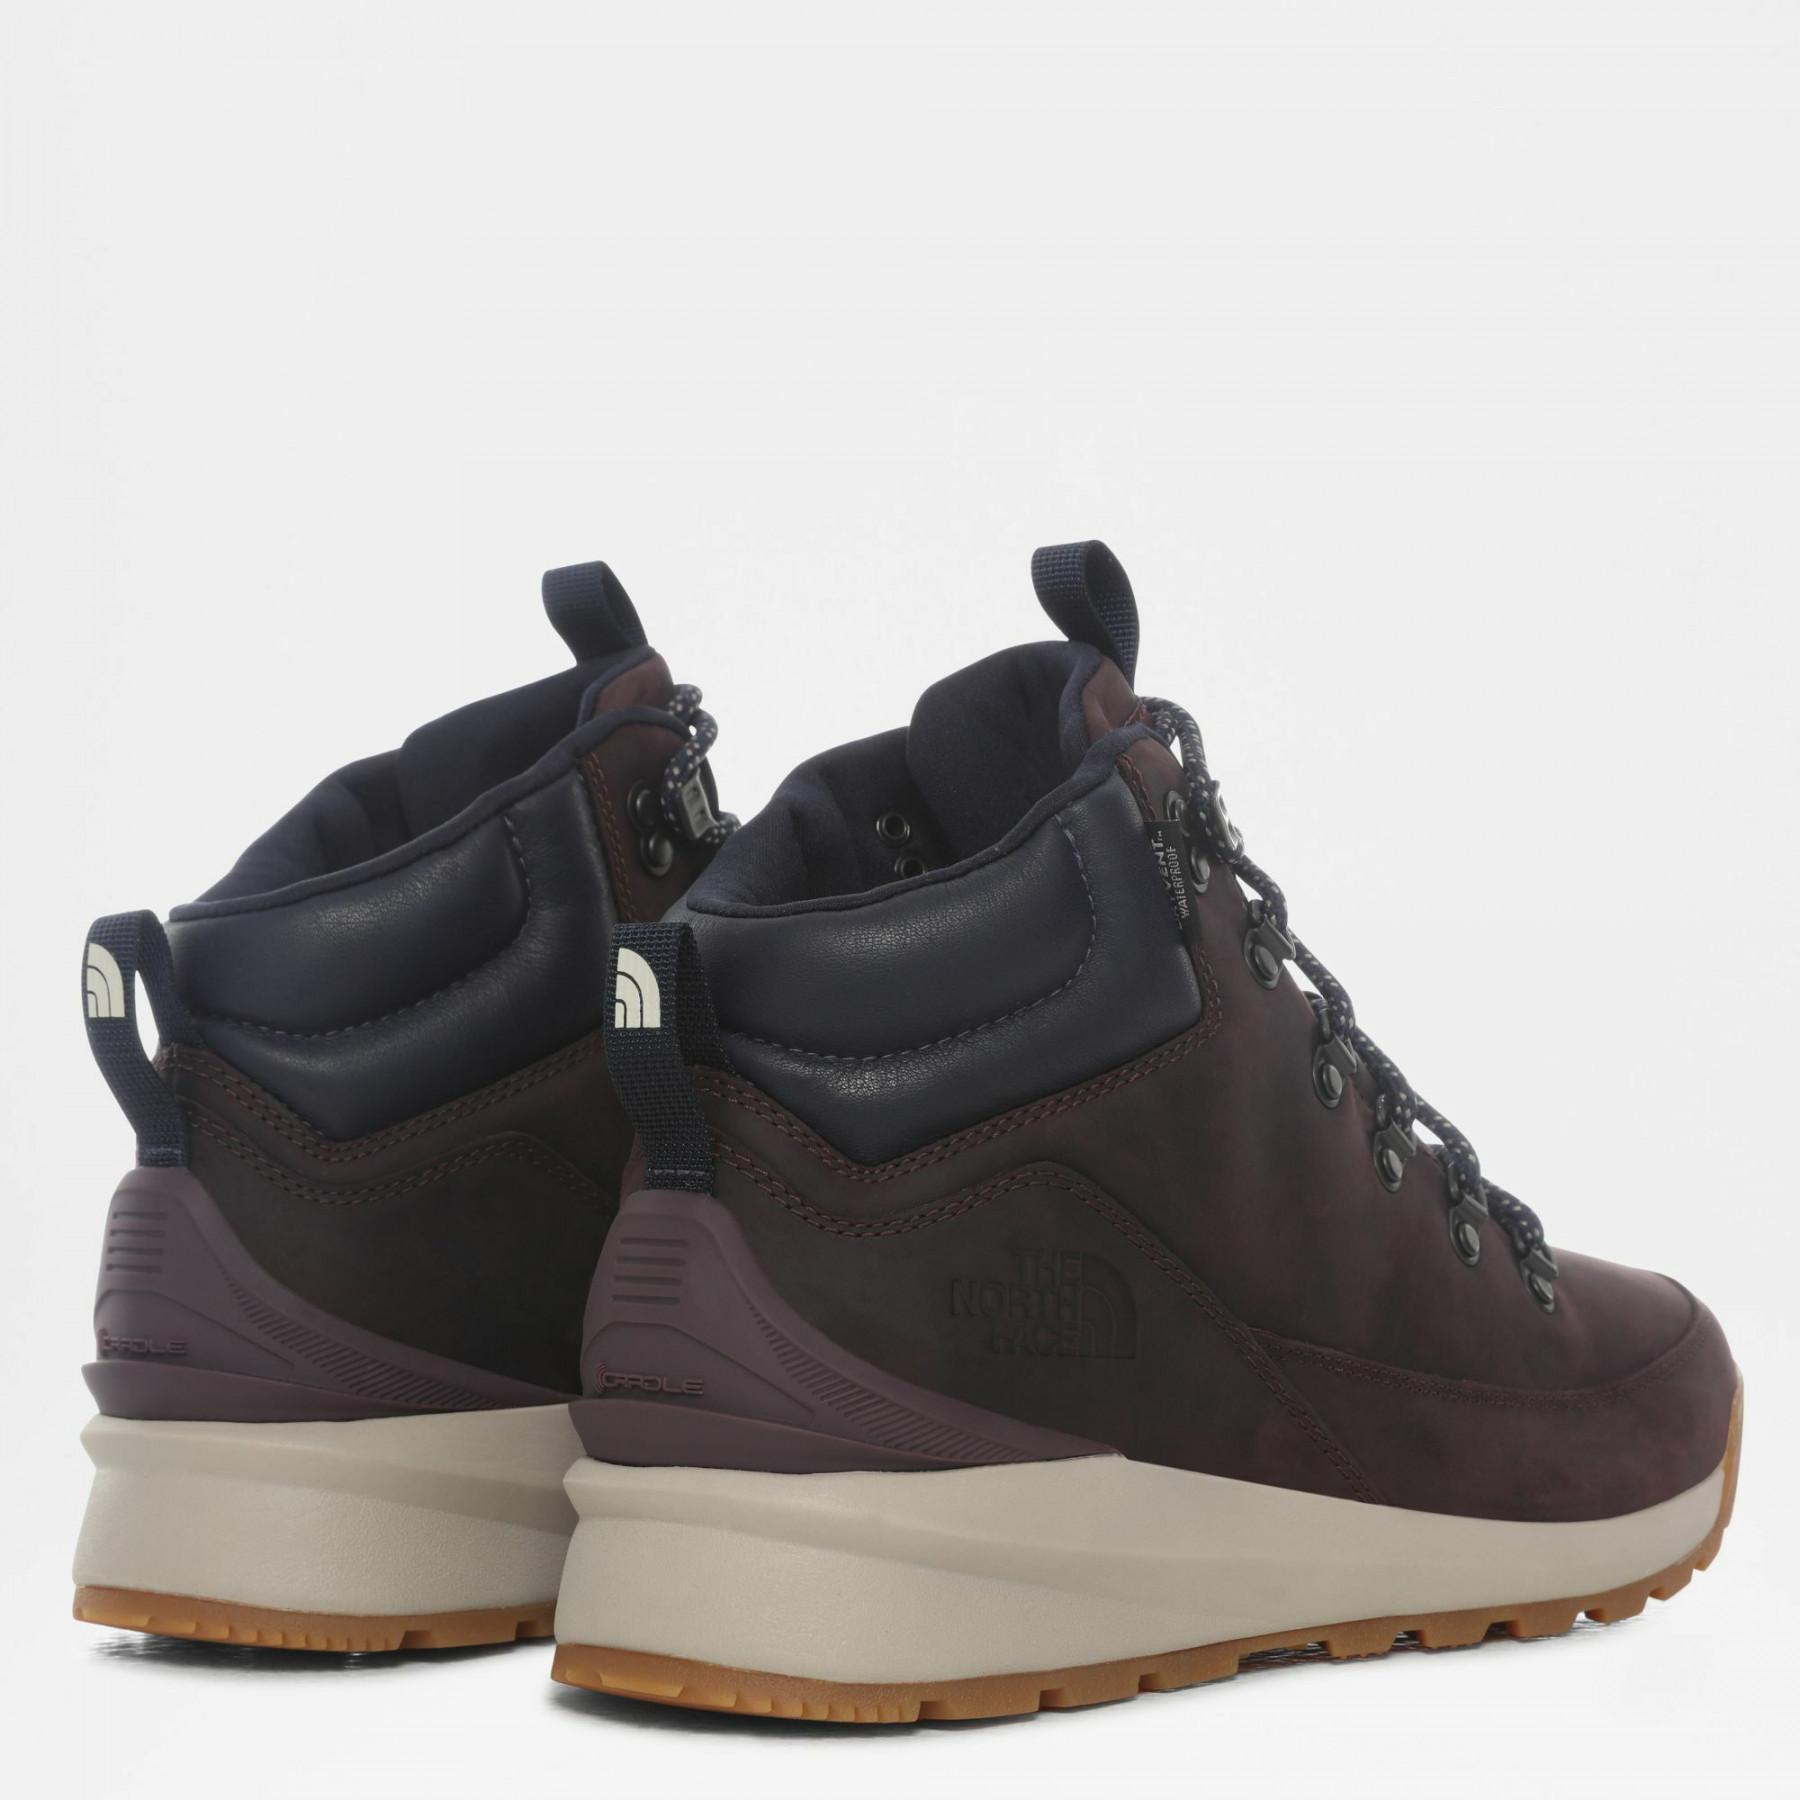 Formadores The North Face Premium waterproof-leather